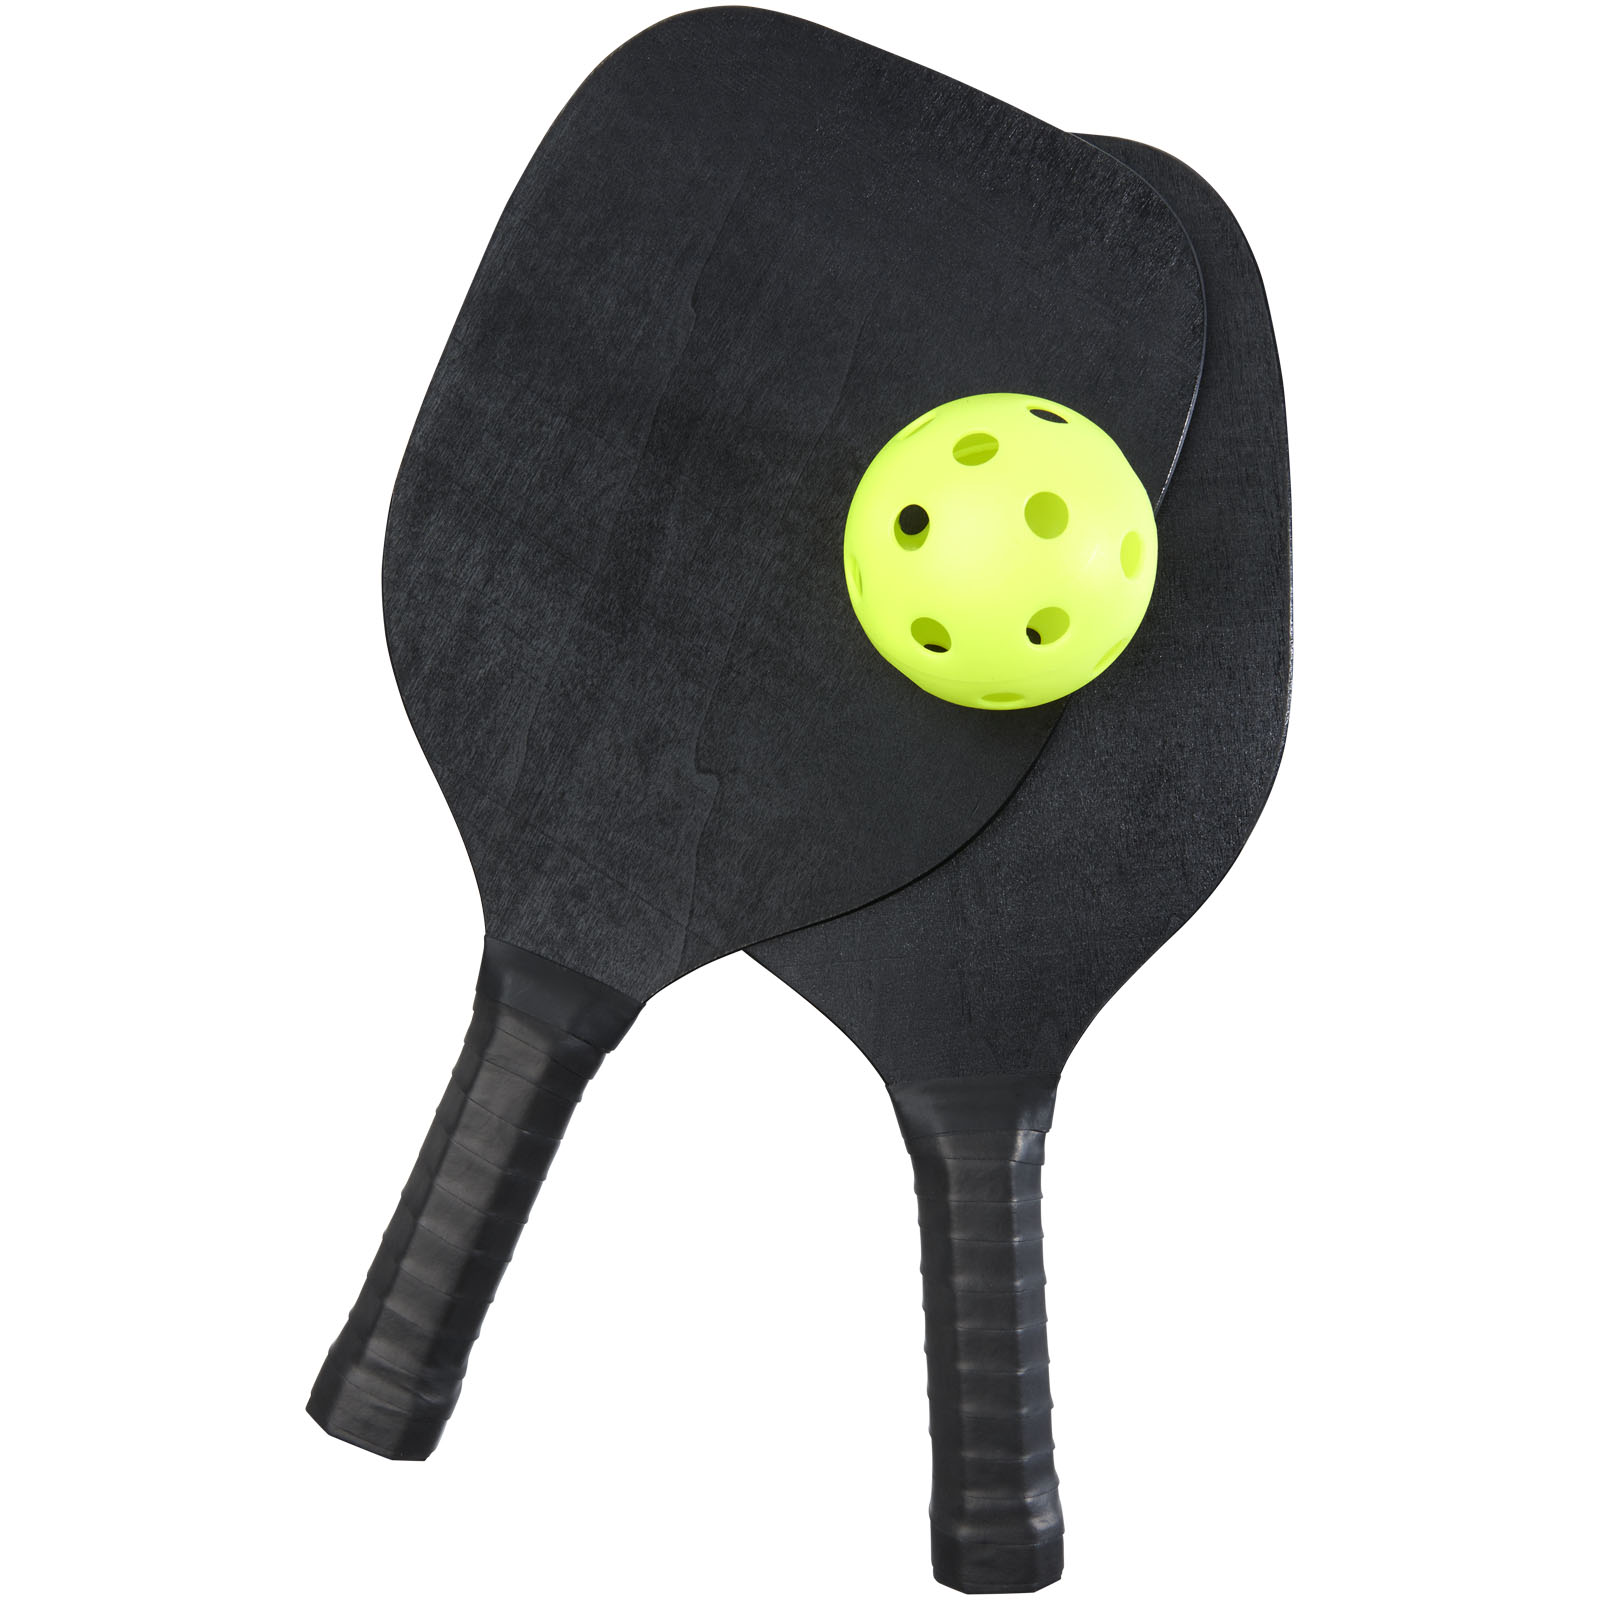 Advertising Outdoor Games - Enrique paddle set in mesh pouch - 4